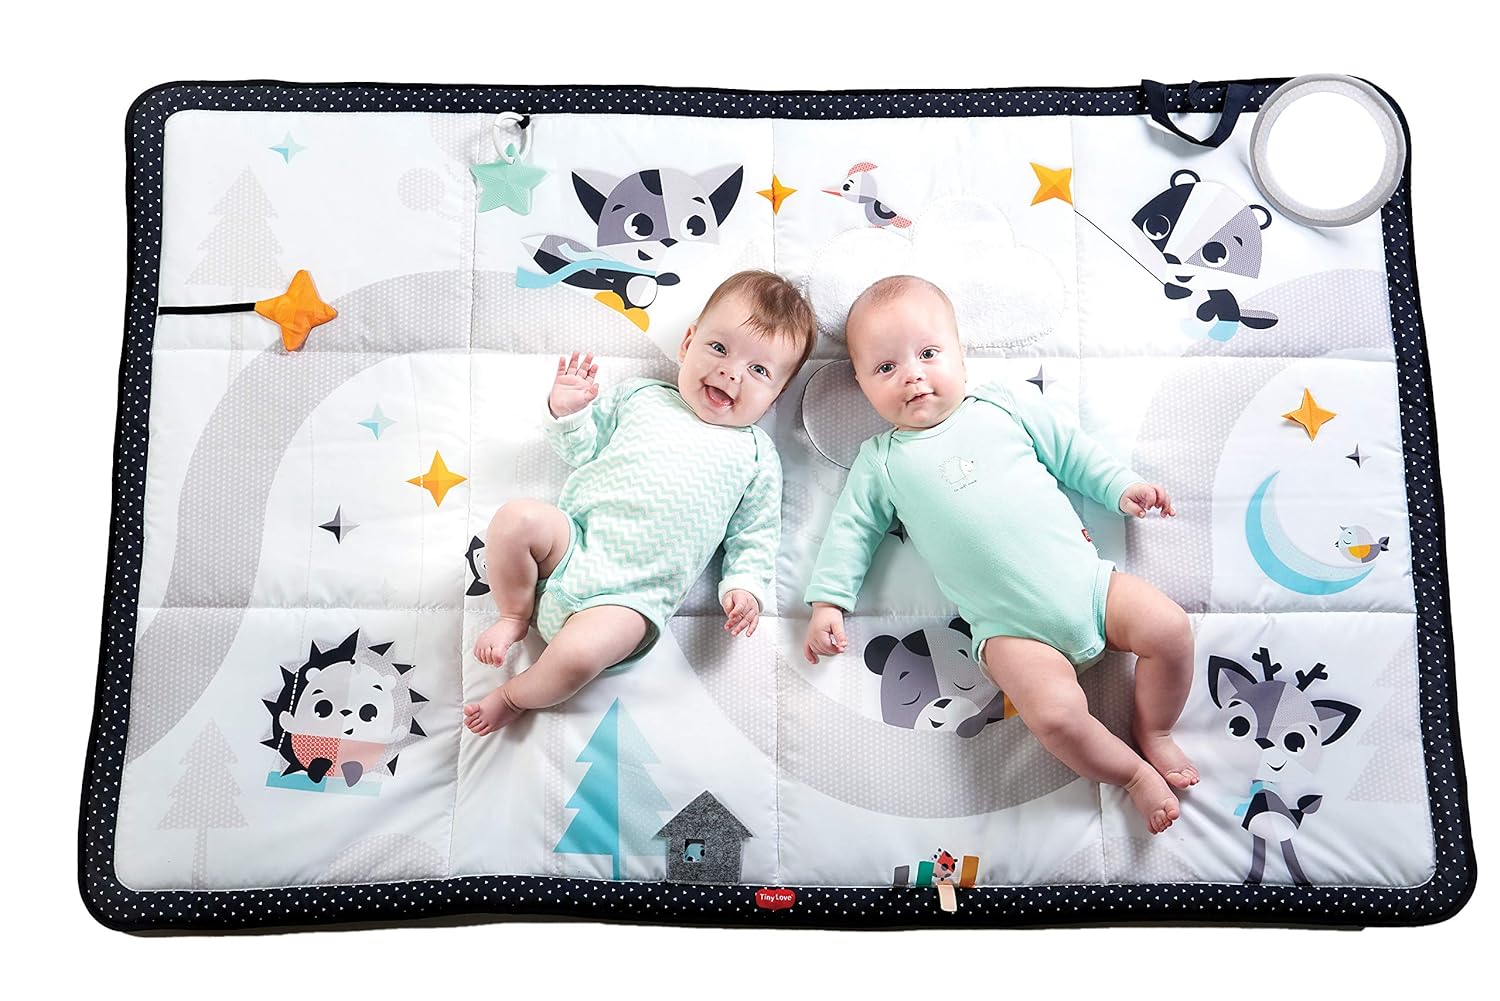 Baby Care Play Mats: Creating a Safe Haven for Little Explorers